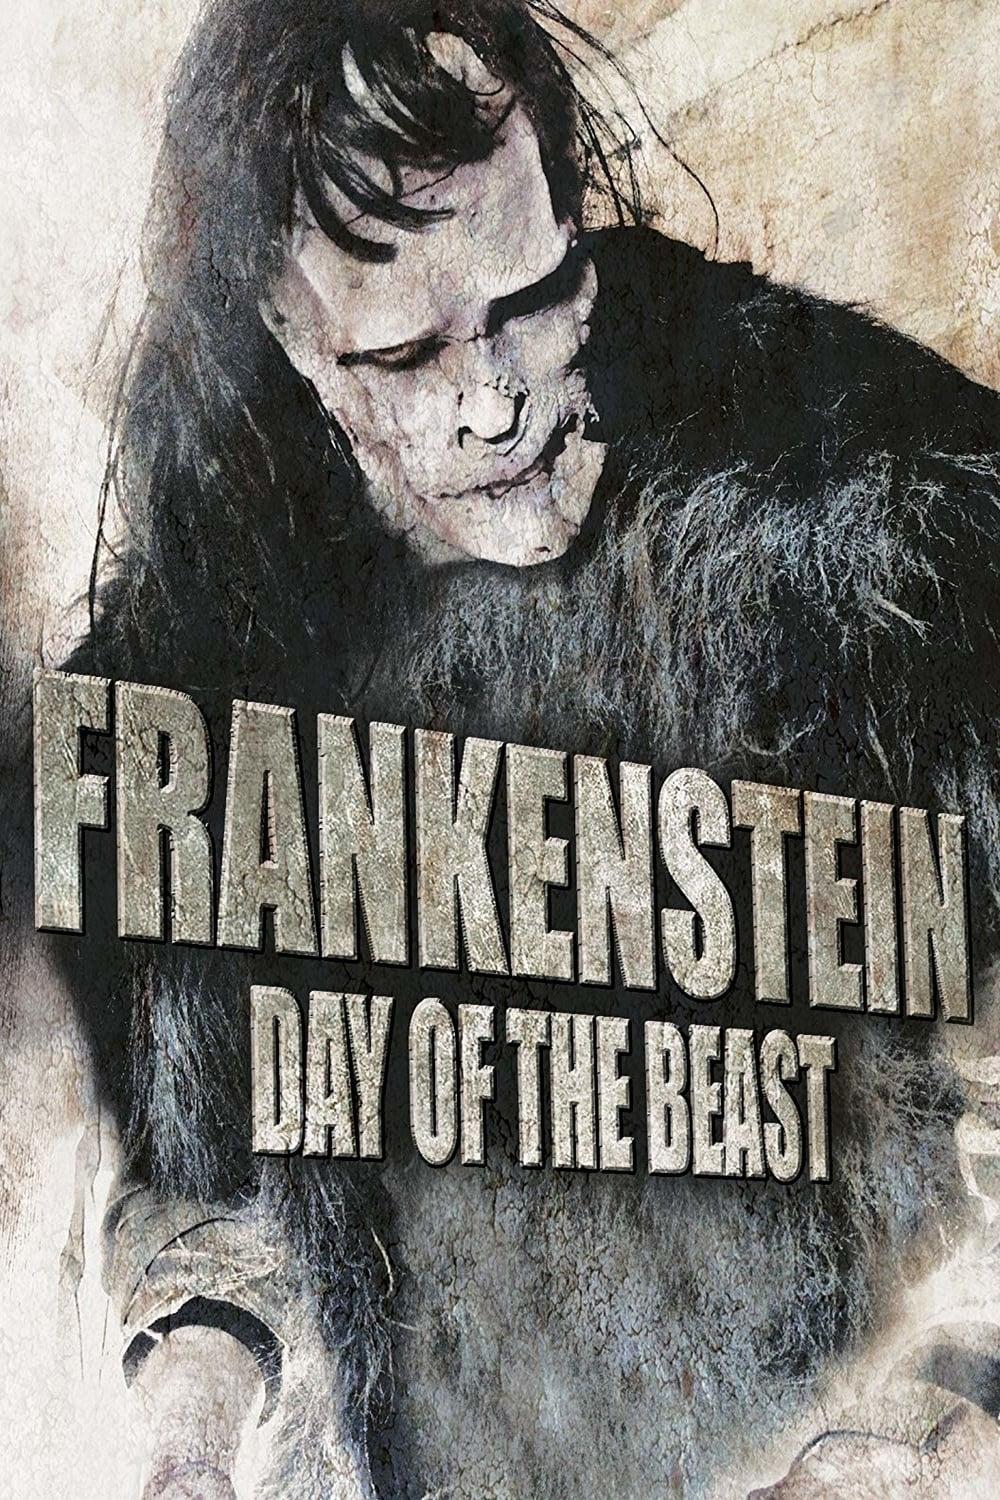 Frankenstein: Day of the Beast poster